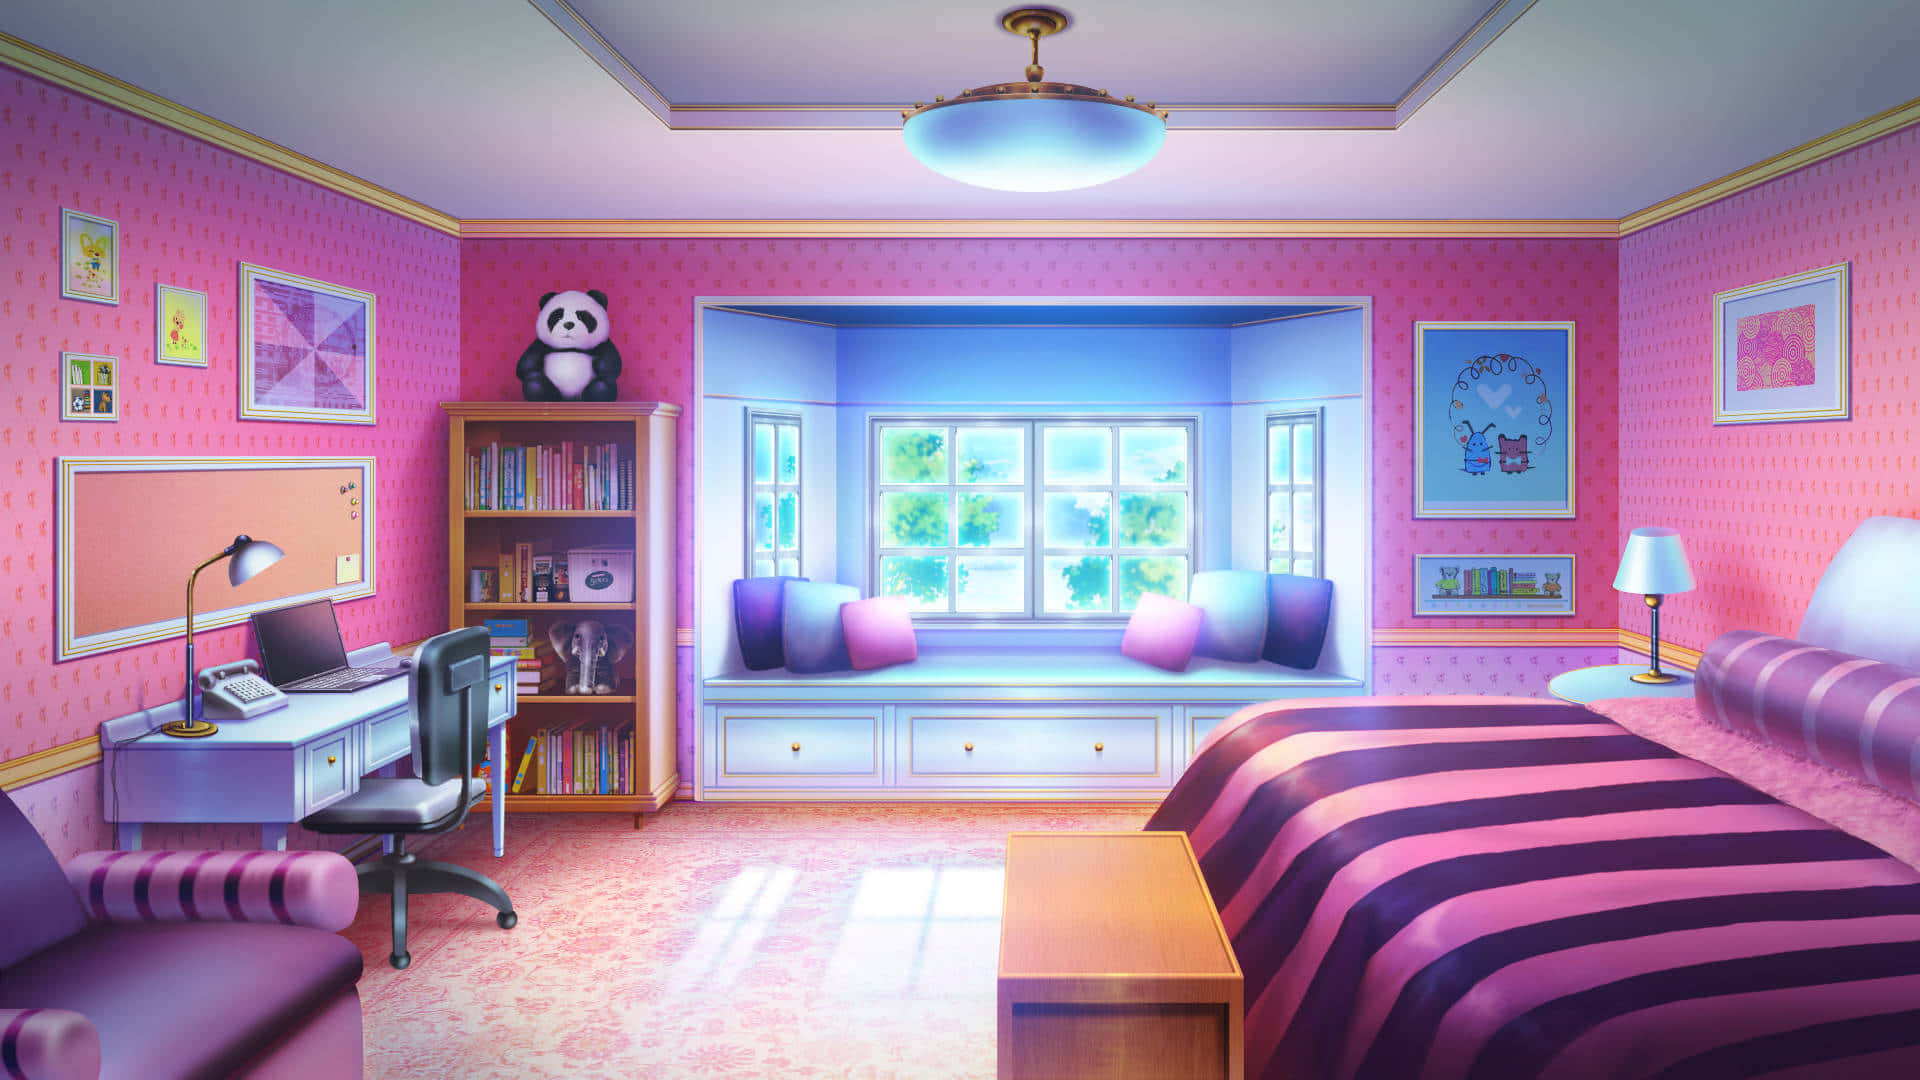 A cozy and colorful Kawaii-inspired room interior Wallpaper